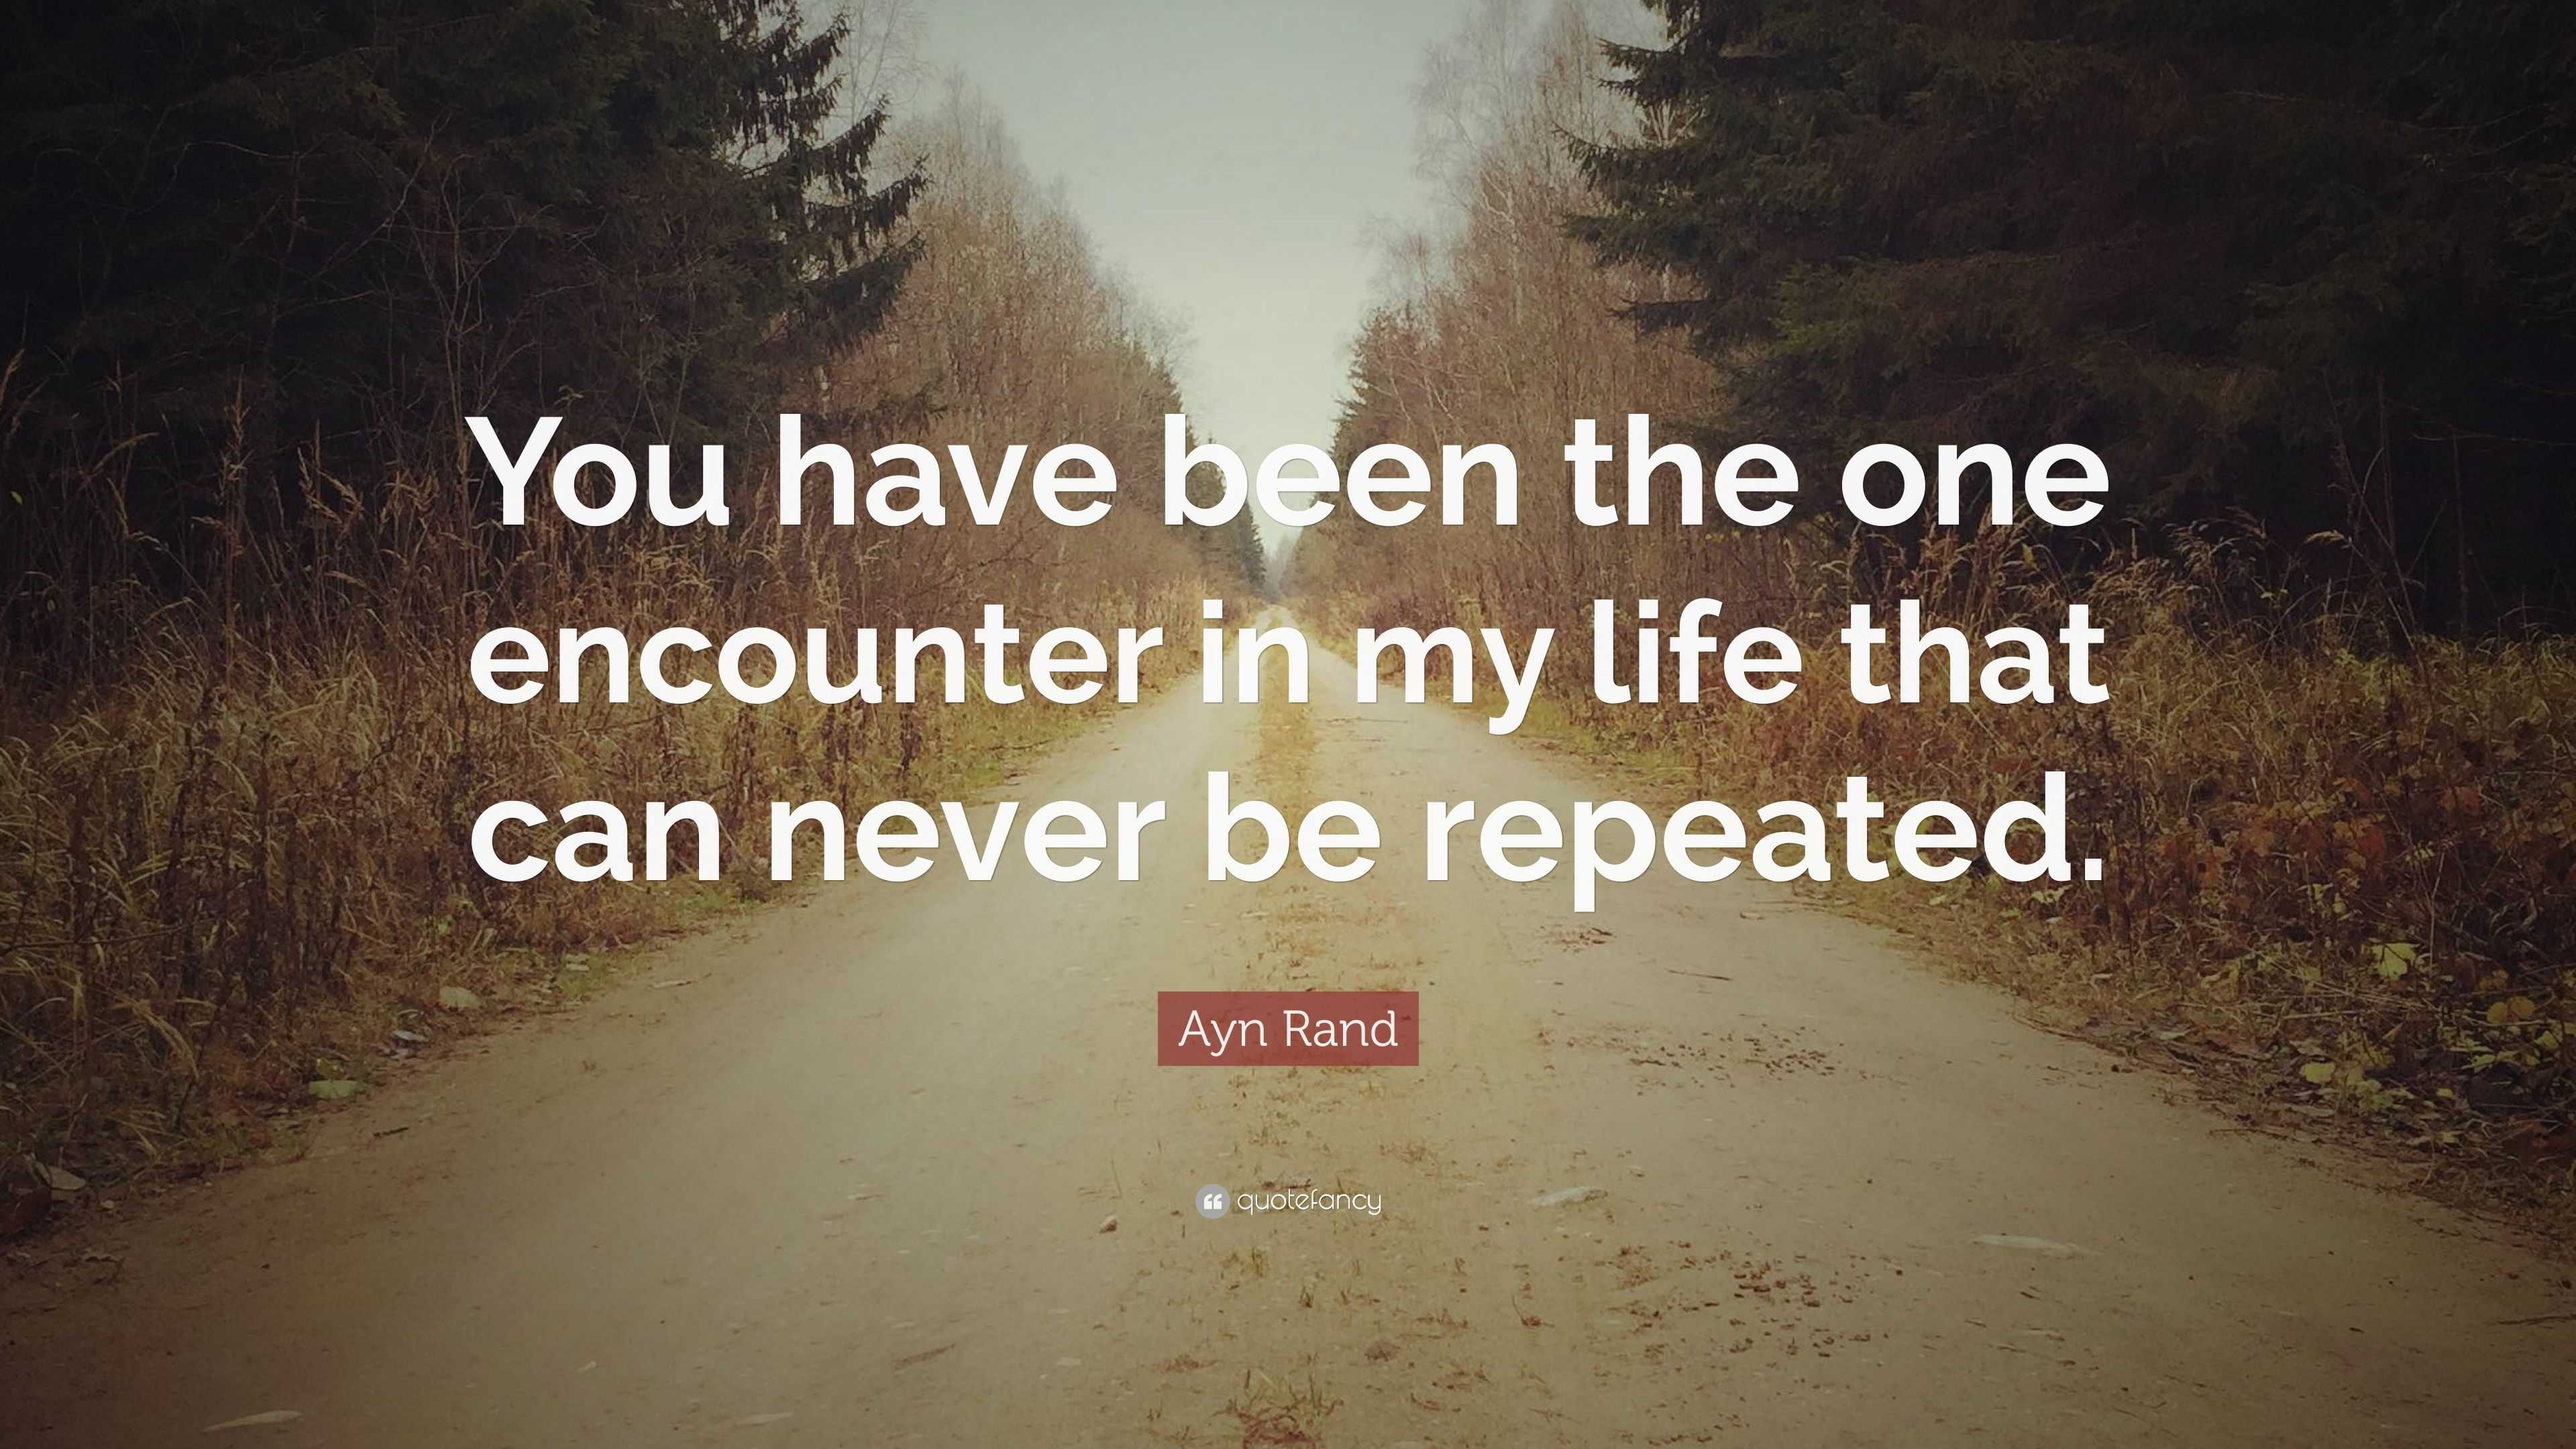 Ayn Rand Quote: “You have been the one encounter in my life that can ...